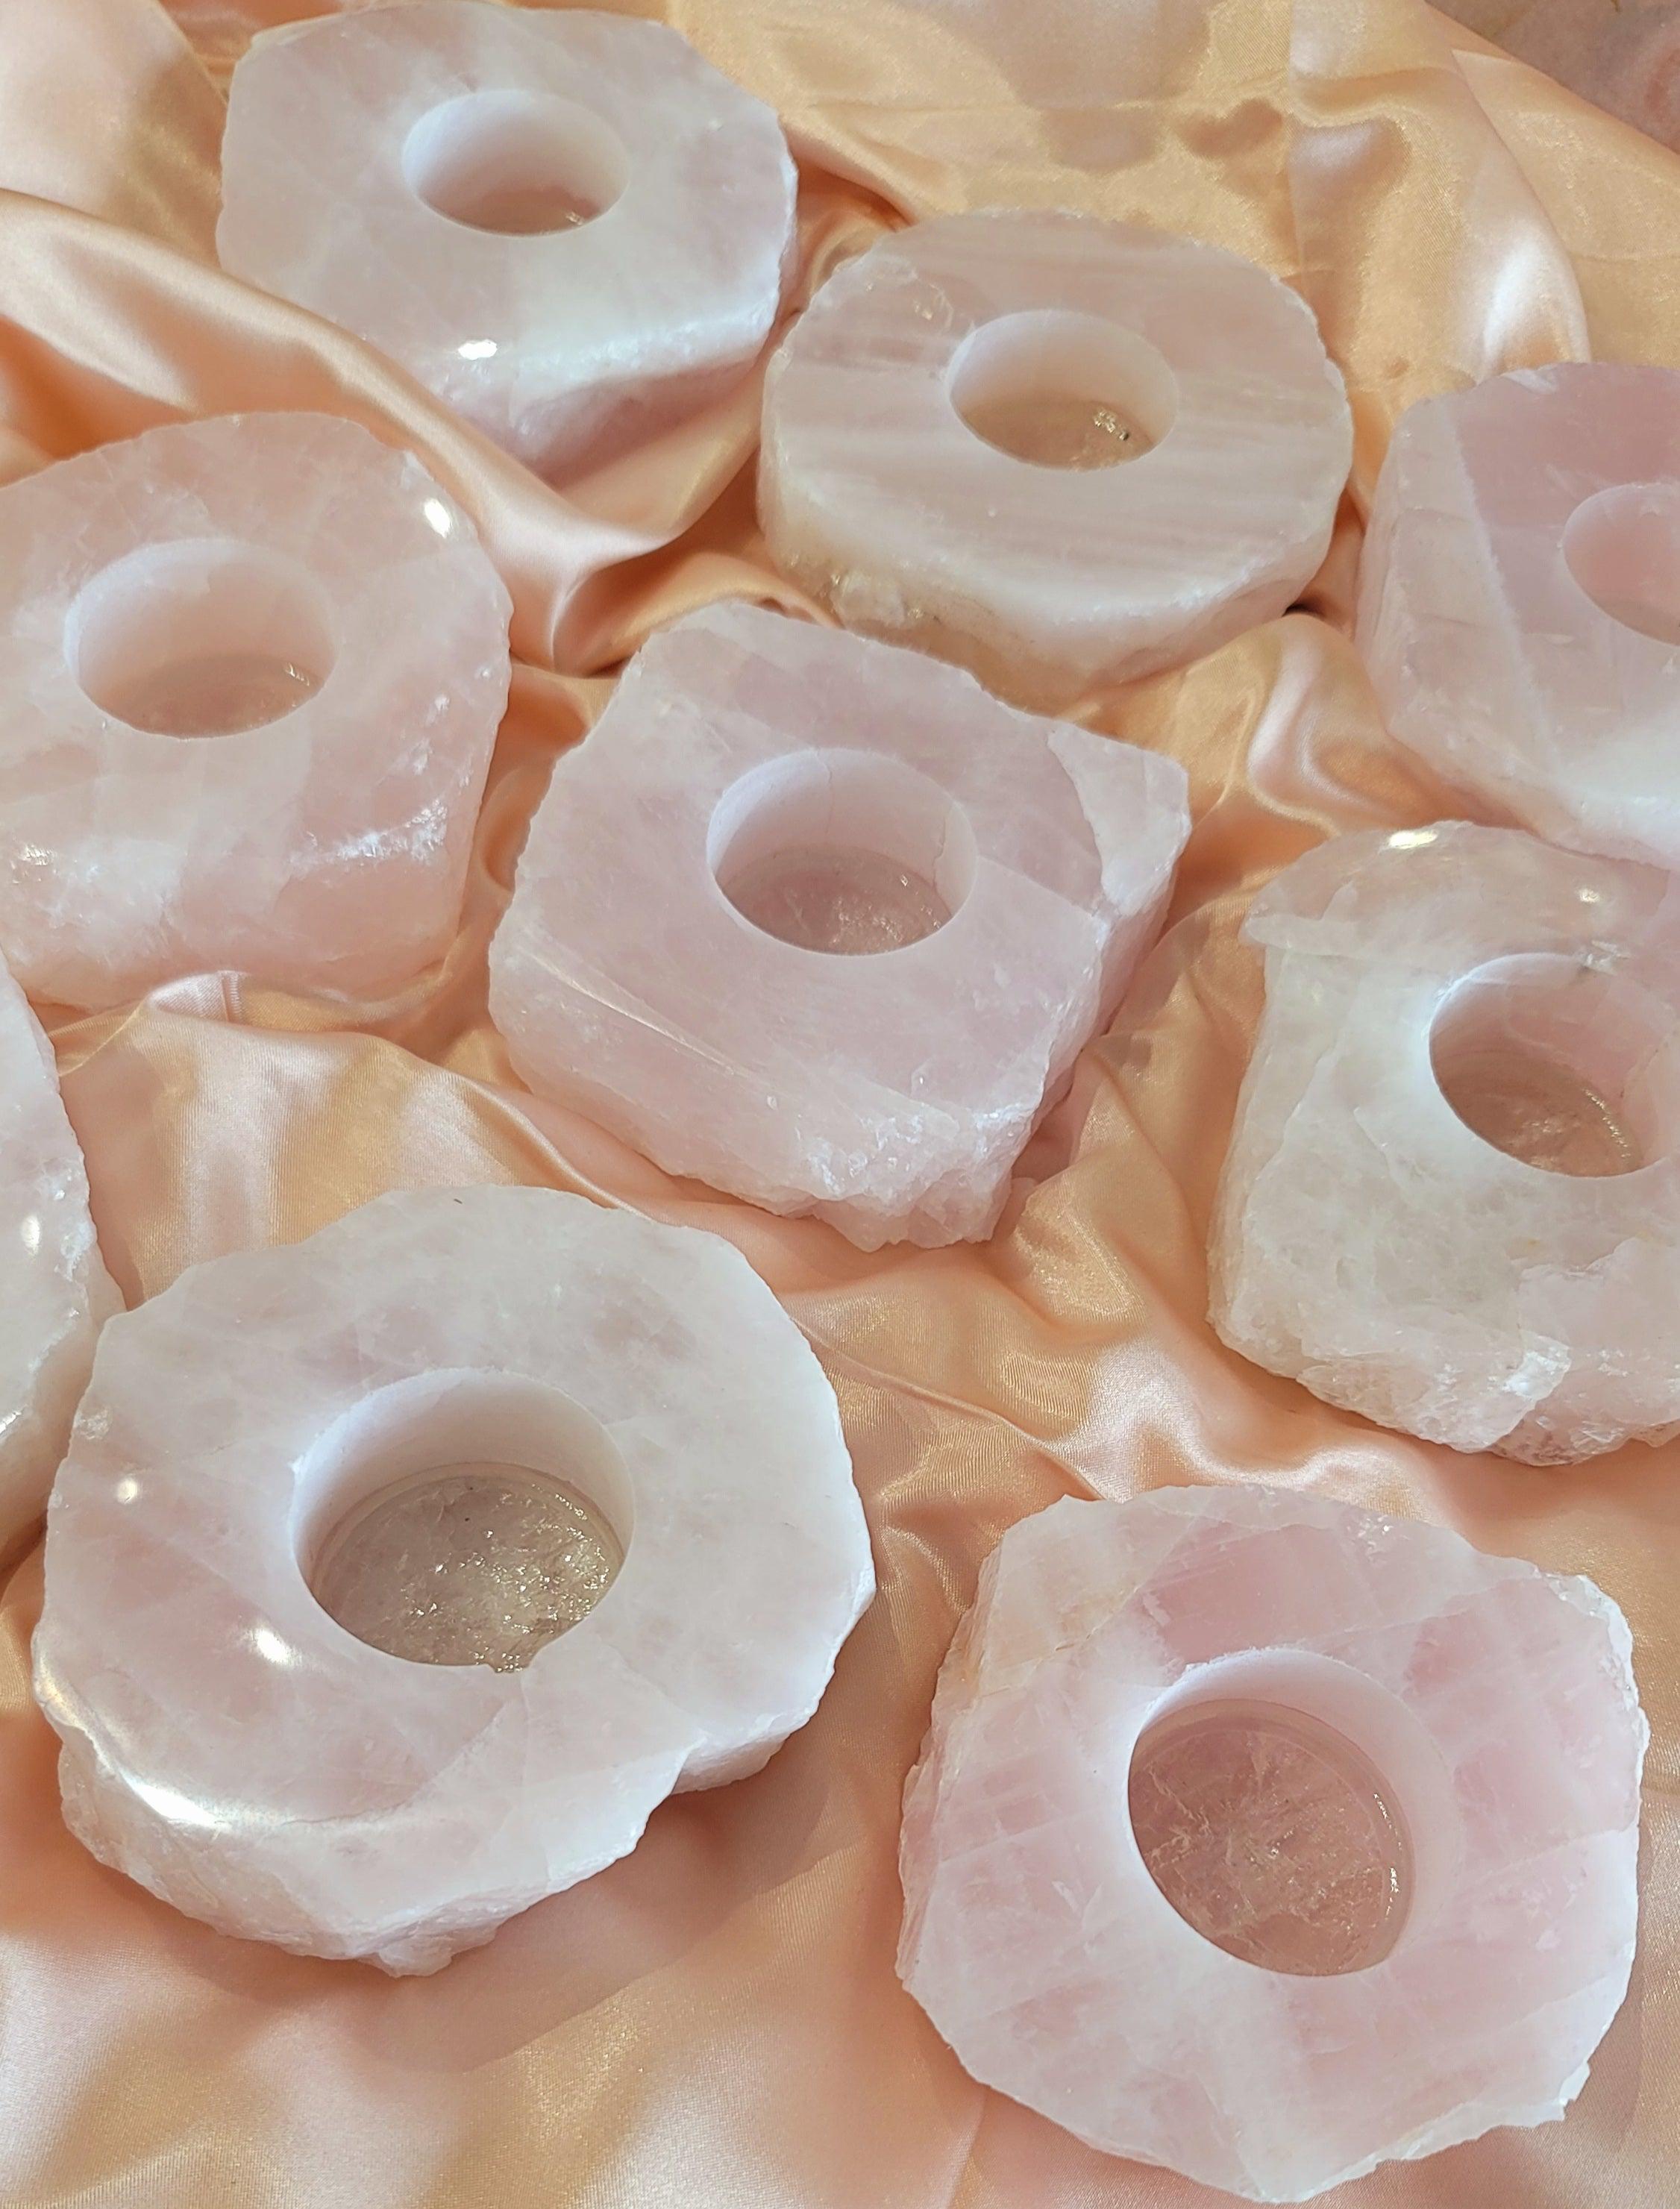 Polished Rose Quartz Candle Holder for Peaceful and Loving Vibes